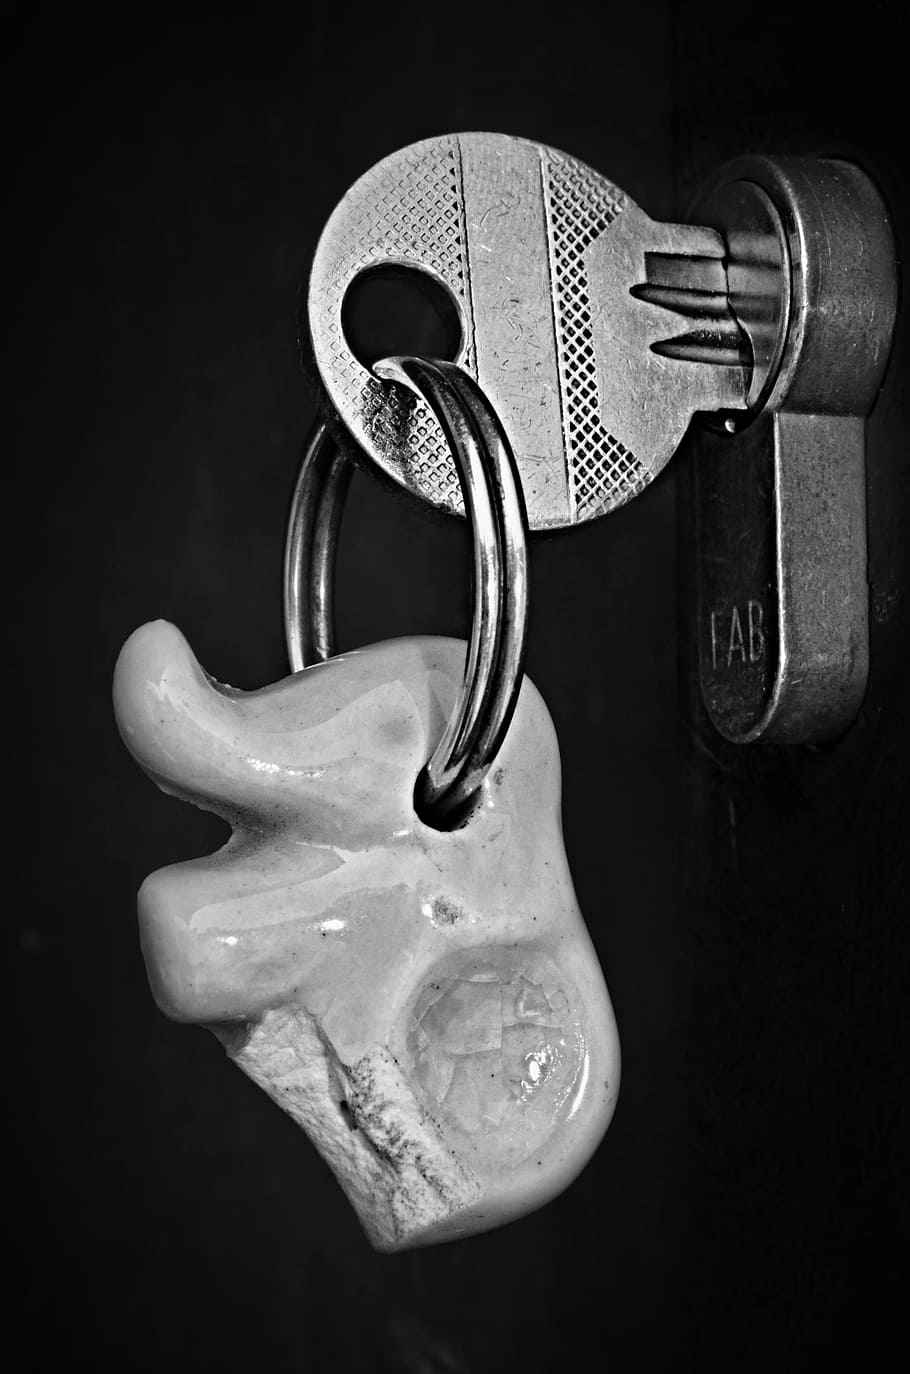 grayscale photo, gray, key, lock, bauble, elephant, castle, close-up, indoors, safety